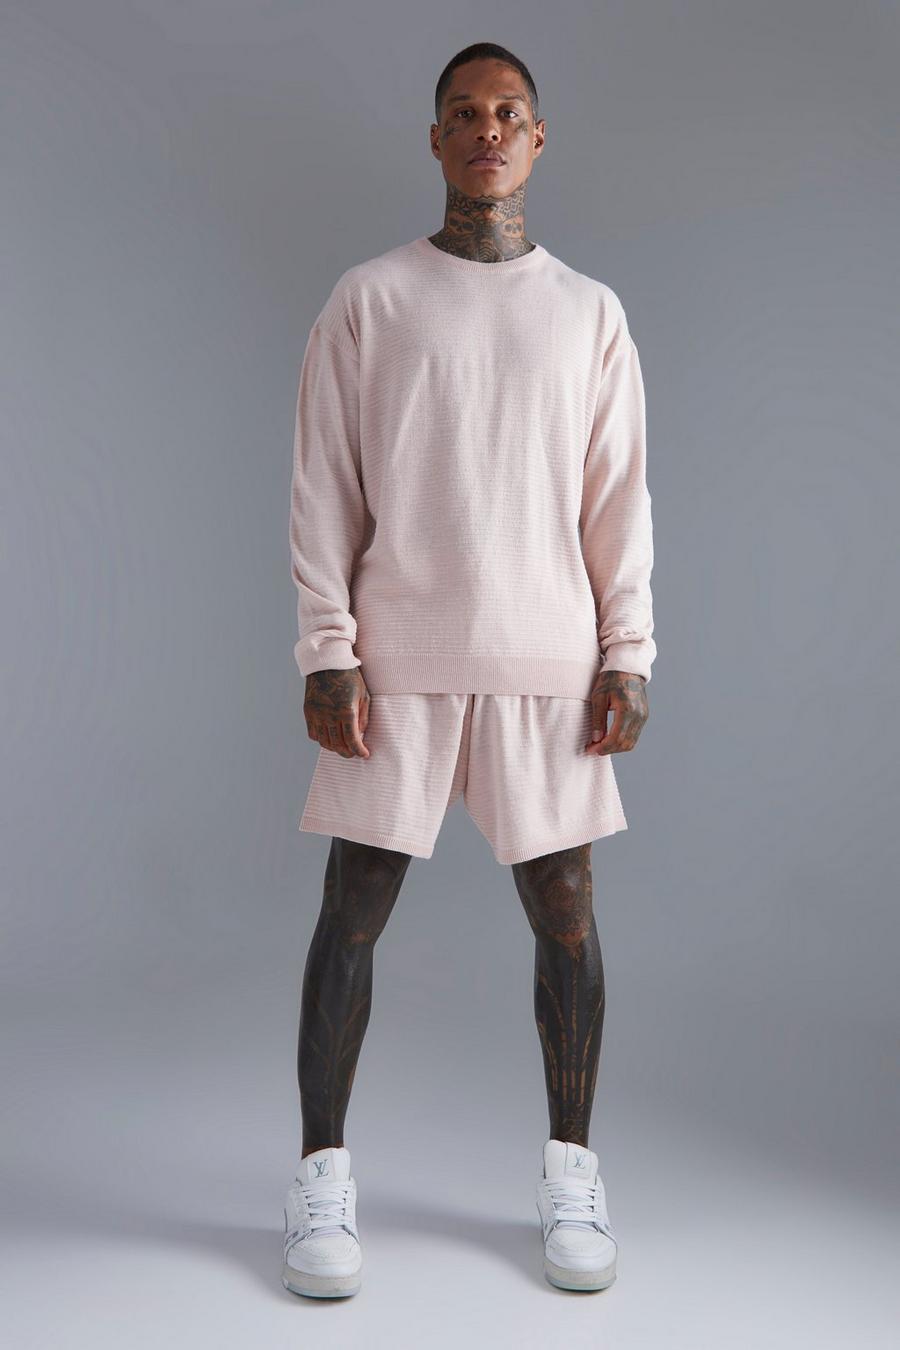 Fine Knitted Rib Oversized Jumper And Short Set, Pale pink rosa